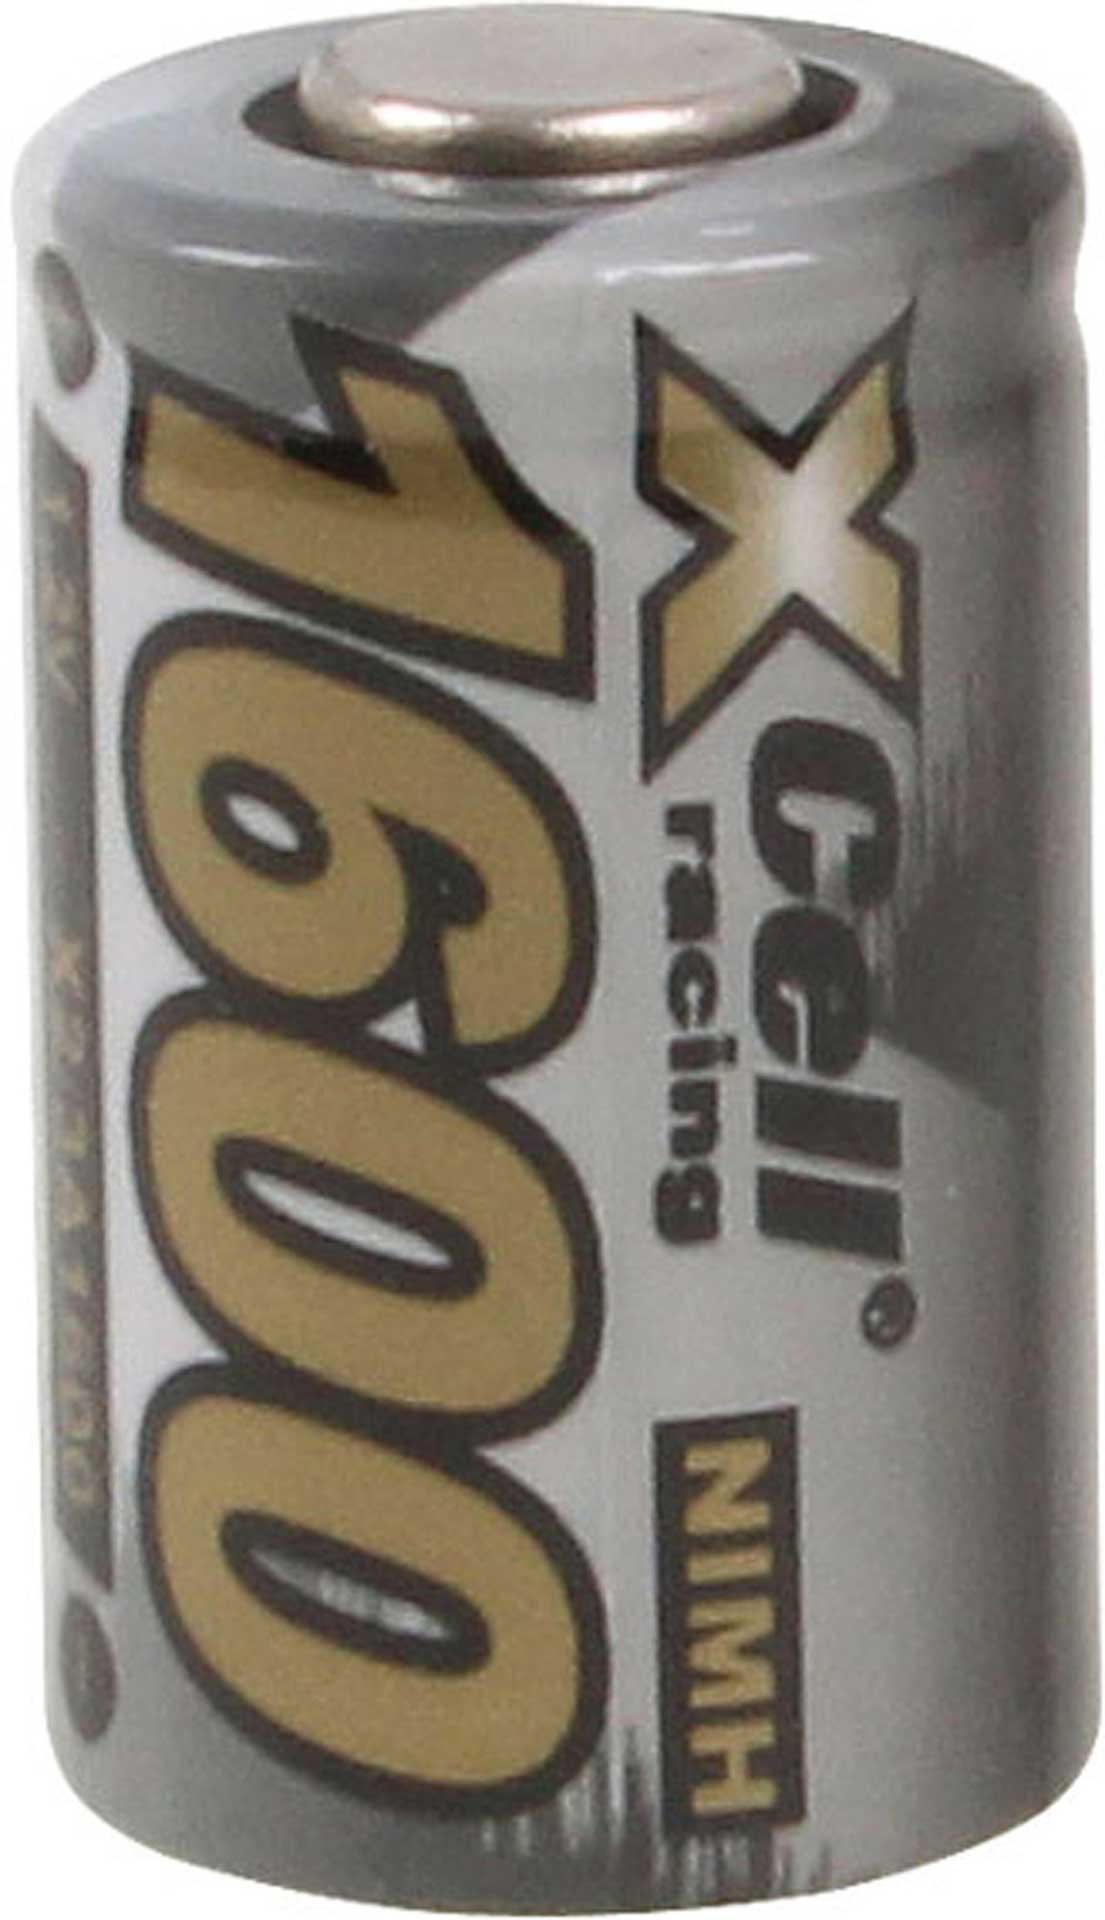 XCELL NI-MH SINGLE CELL BATTERY 1.2 VOLT 1600 MAH 2/3A WITHOUT SOLDERING TAG